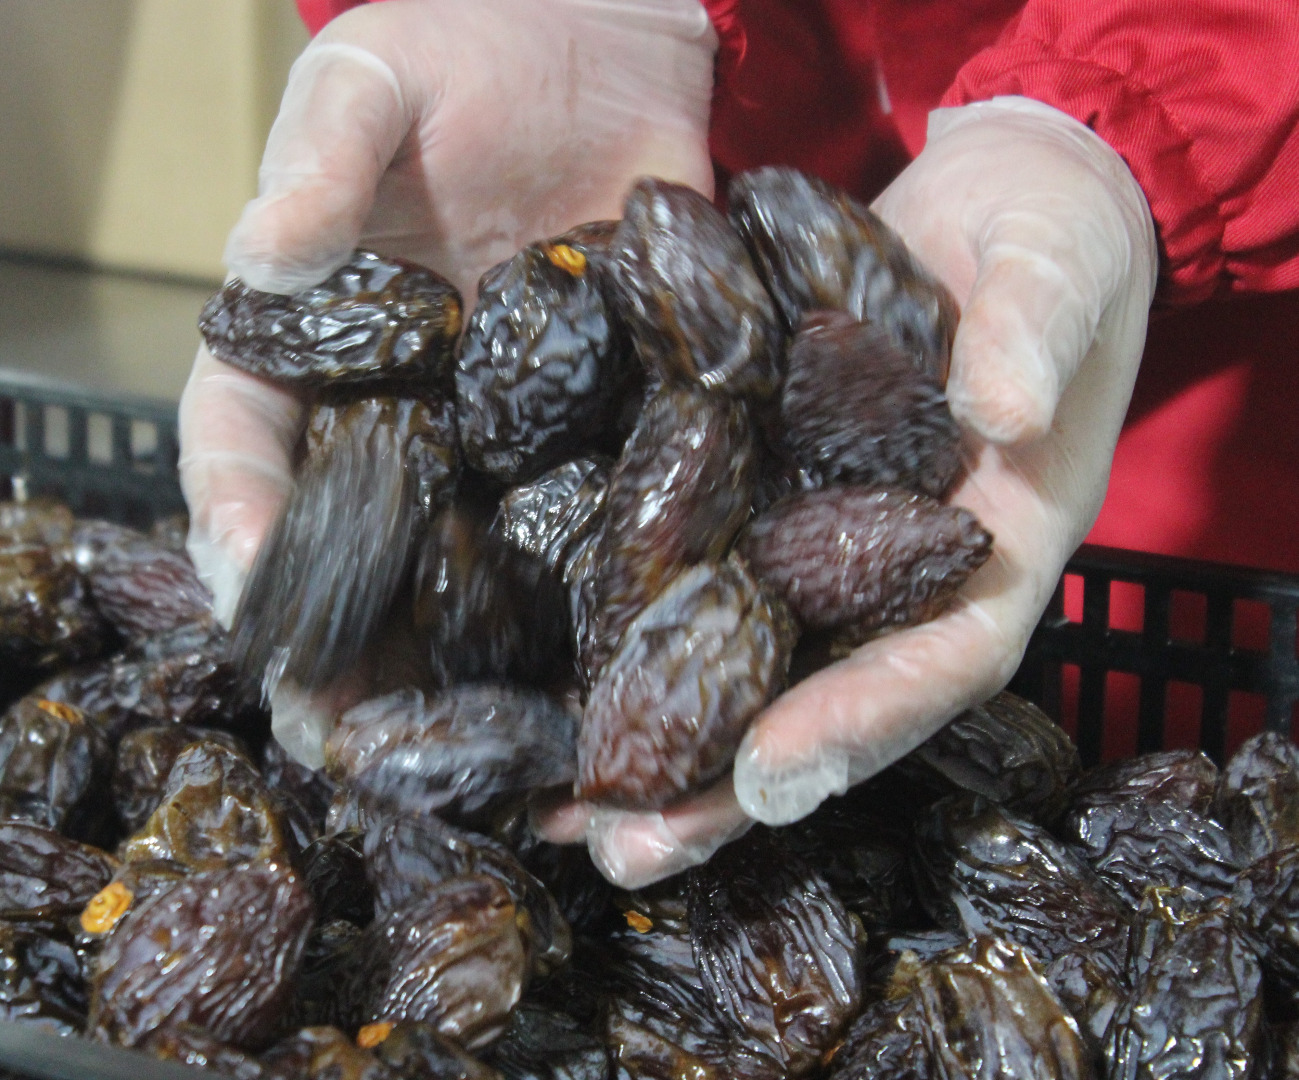 Buy Iranian Dates |Dates Seller| Date Exporter Company_ Nutex Co